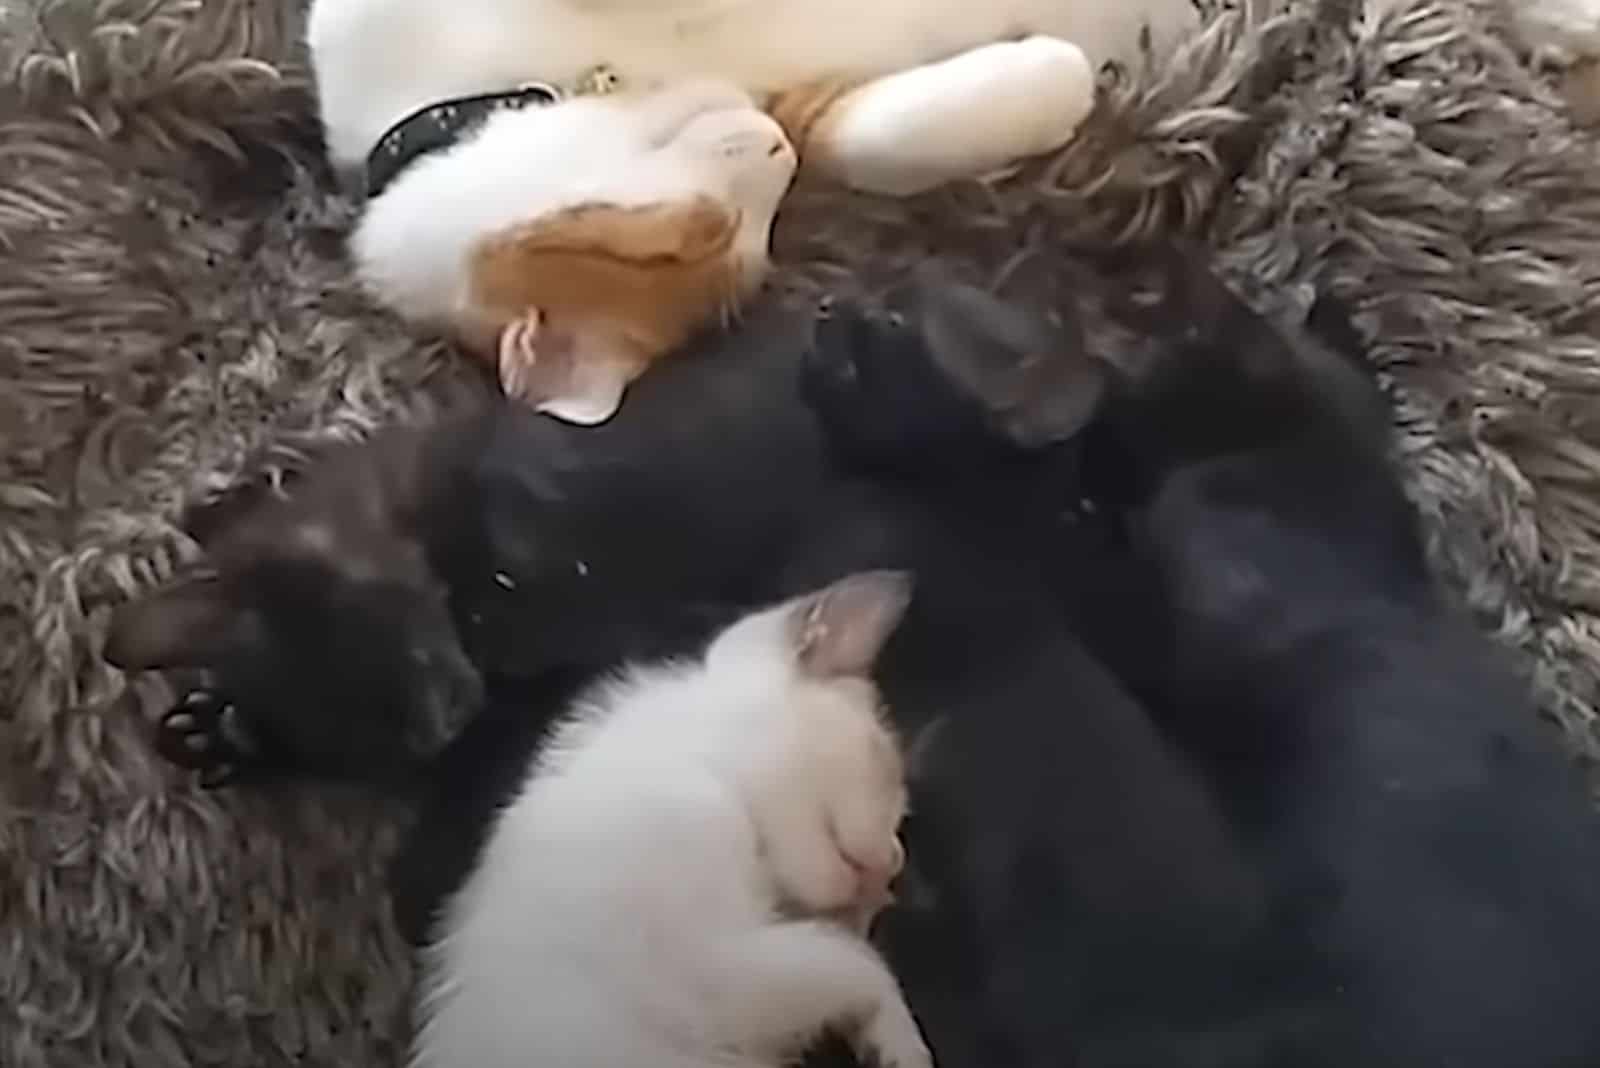 a cat with kittens sleeps on the floor